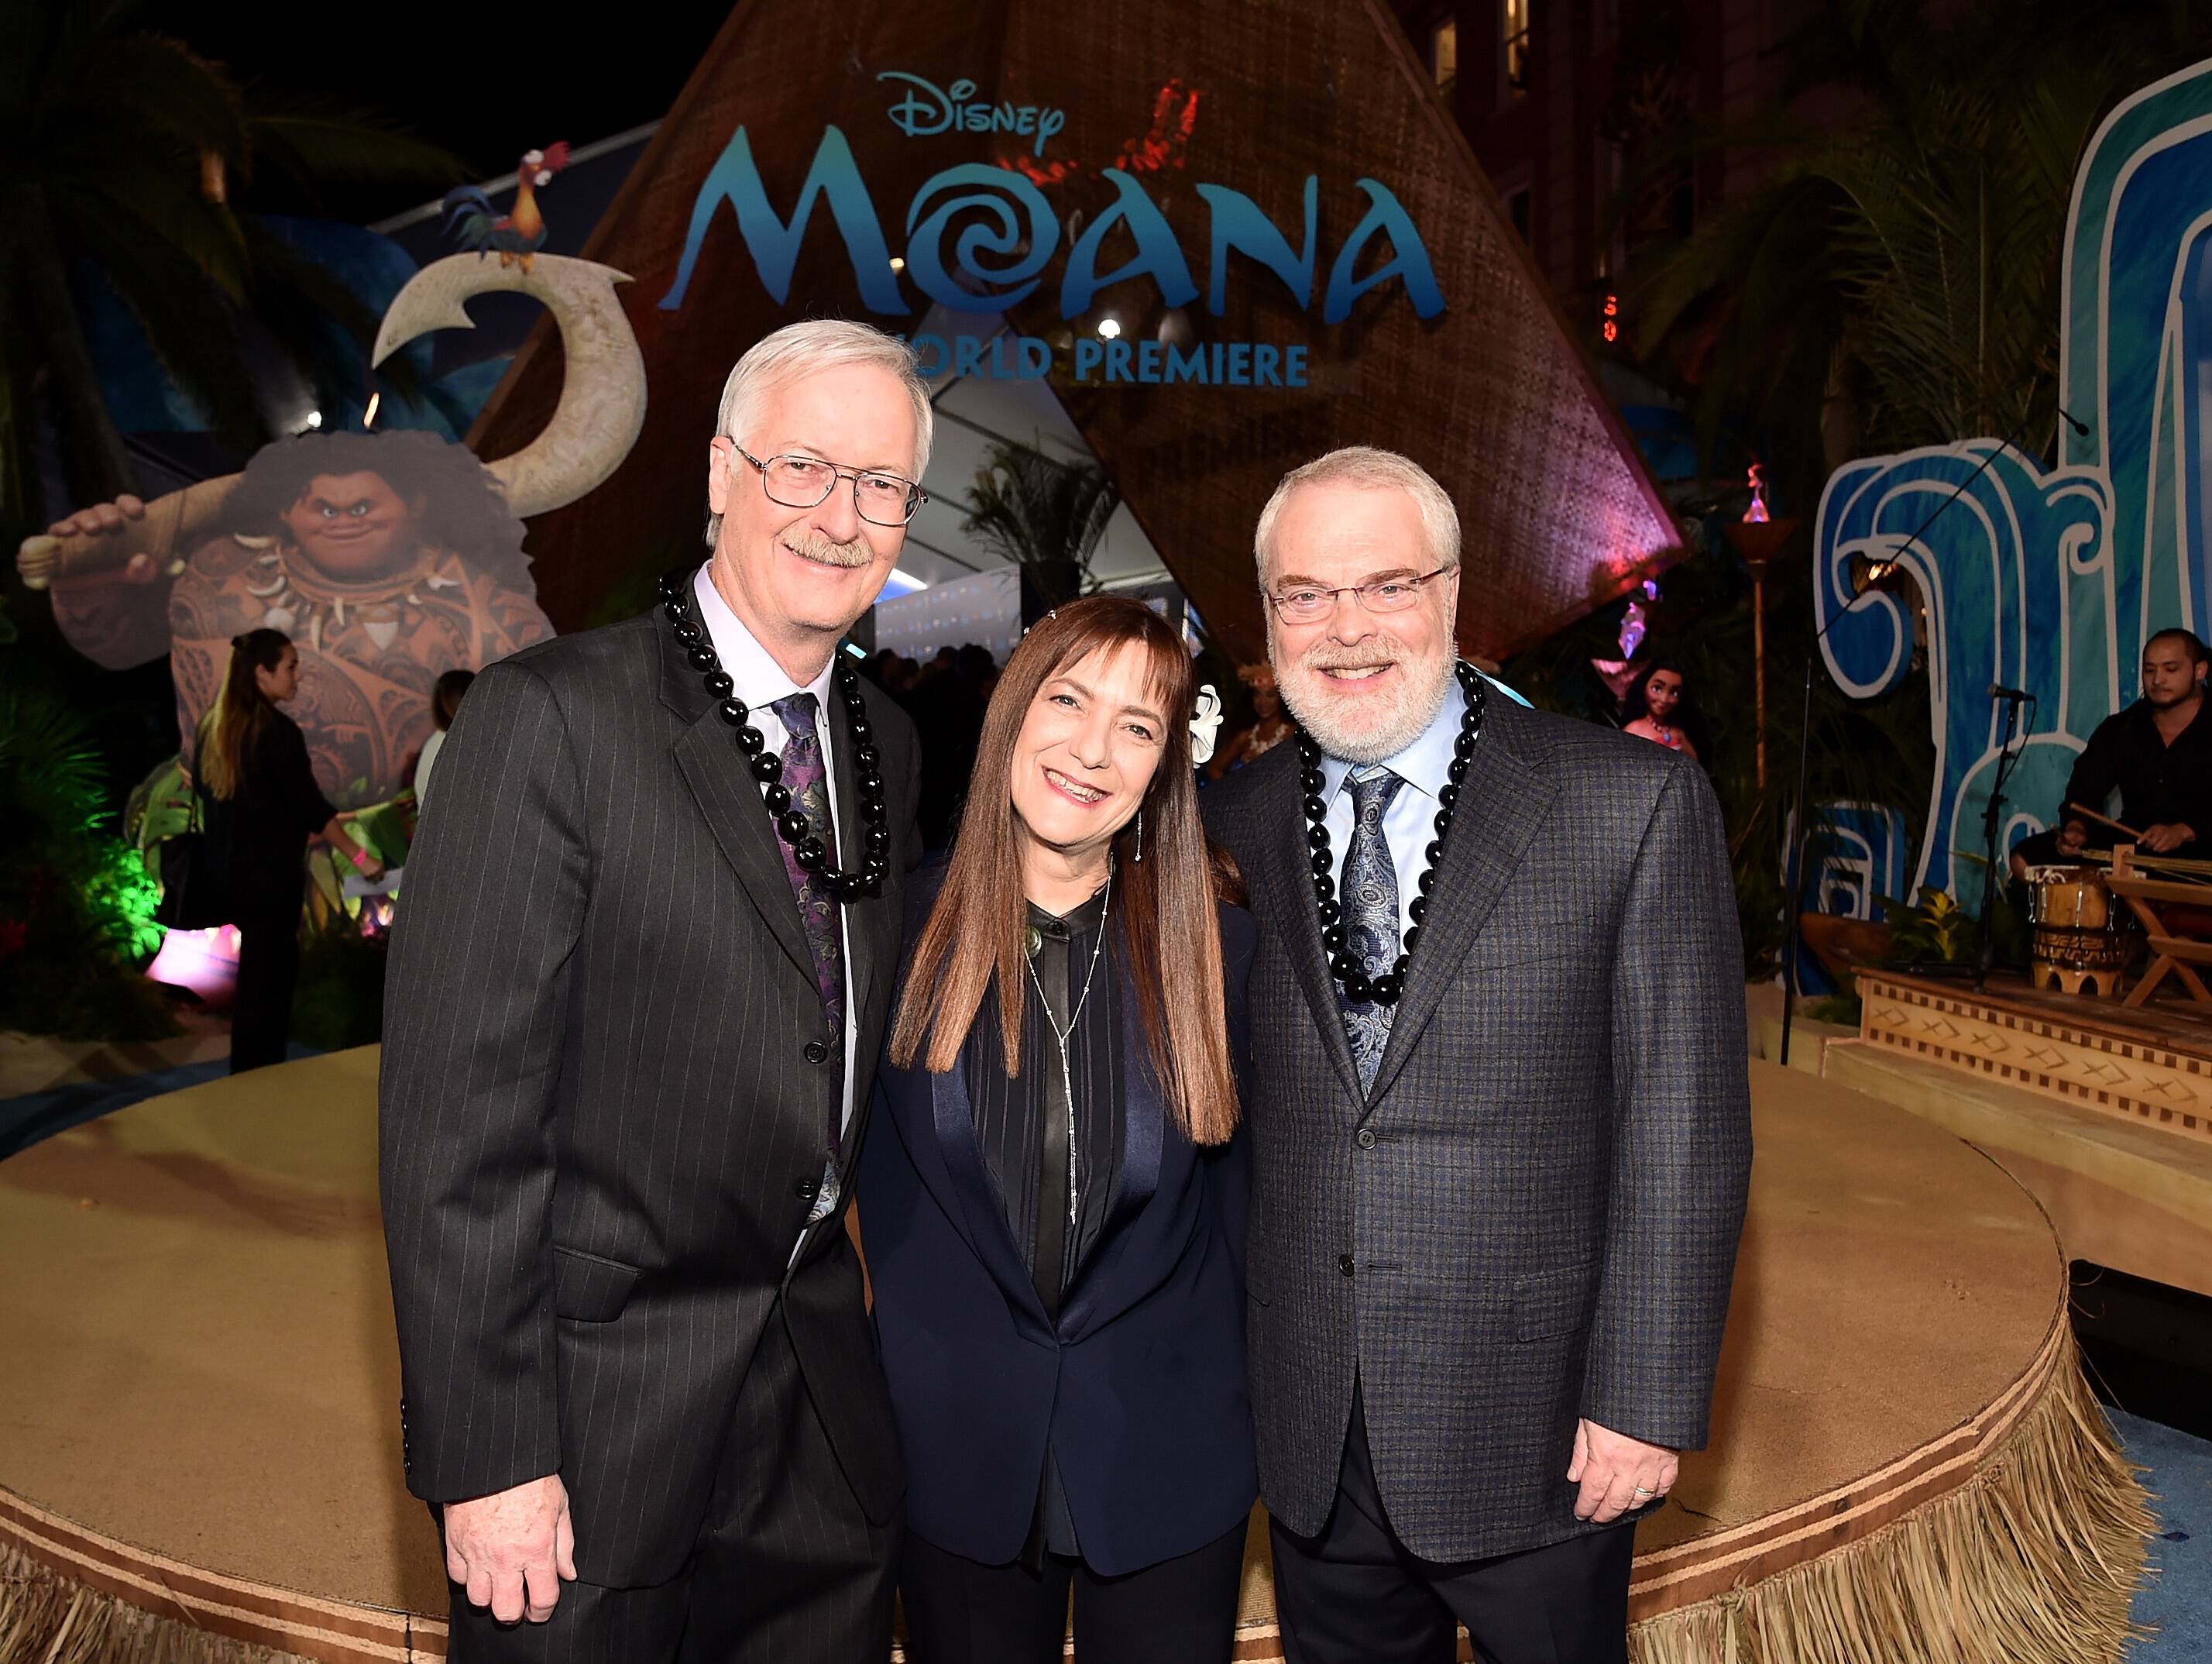 HOLLYWOOD, CA - NOVEMBER 14: (L-R) Director John Musker, producer Osnat Shurer, and director Ron Clements attend The World Premiere of Disneys "MOANA" at the El Capitan Theatre on Monday, November 14, 2016 in Hollywood, CA. (Photo by Alberto E. Rodriguez/Getty Images for Disney) *** Local Caption *** John Musker; Osnat Shurer; Ron Clements